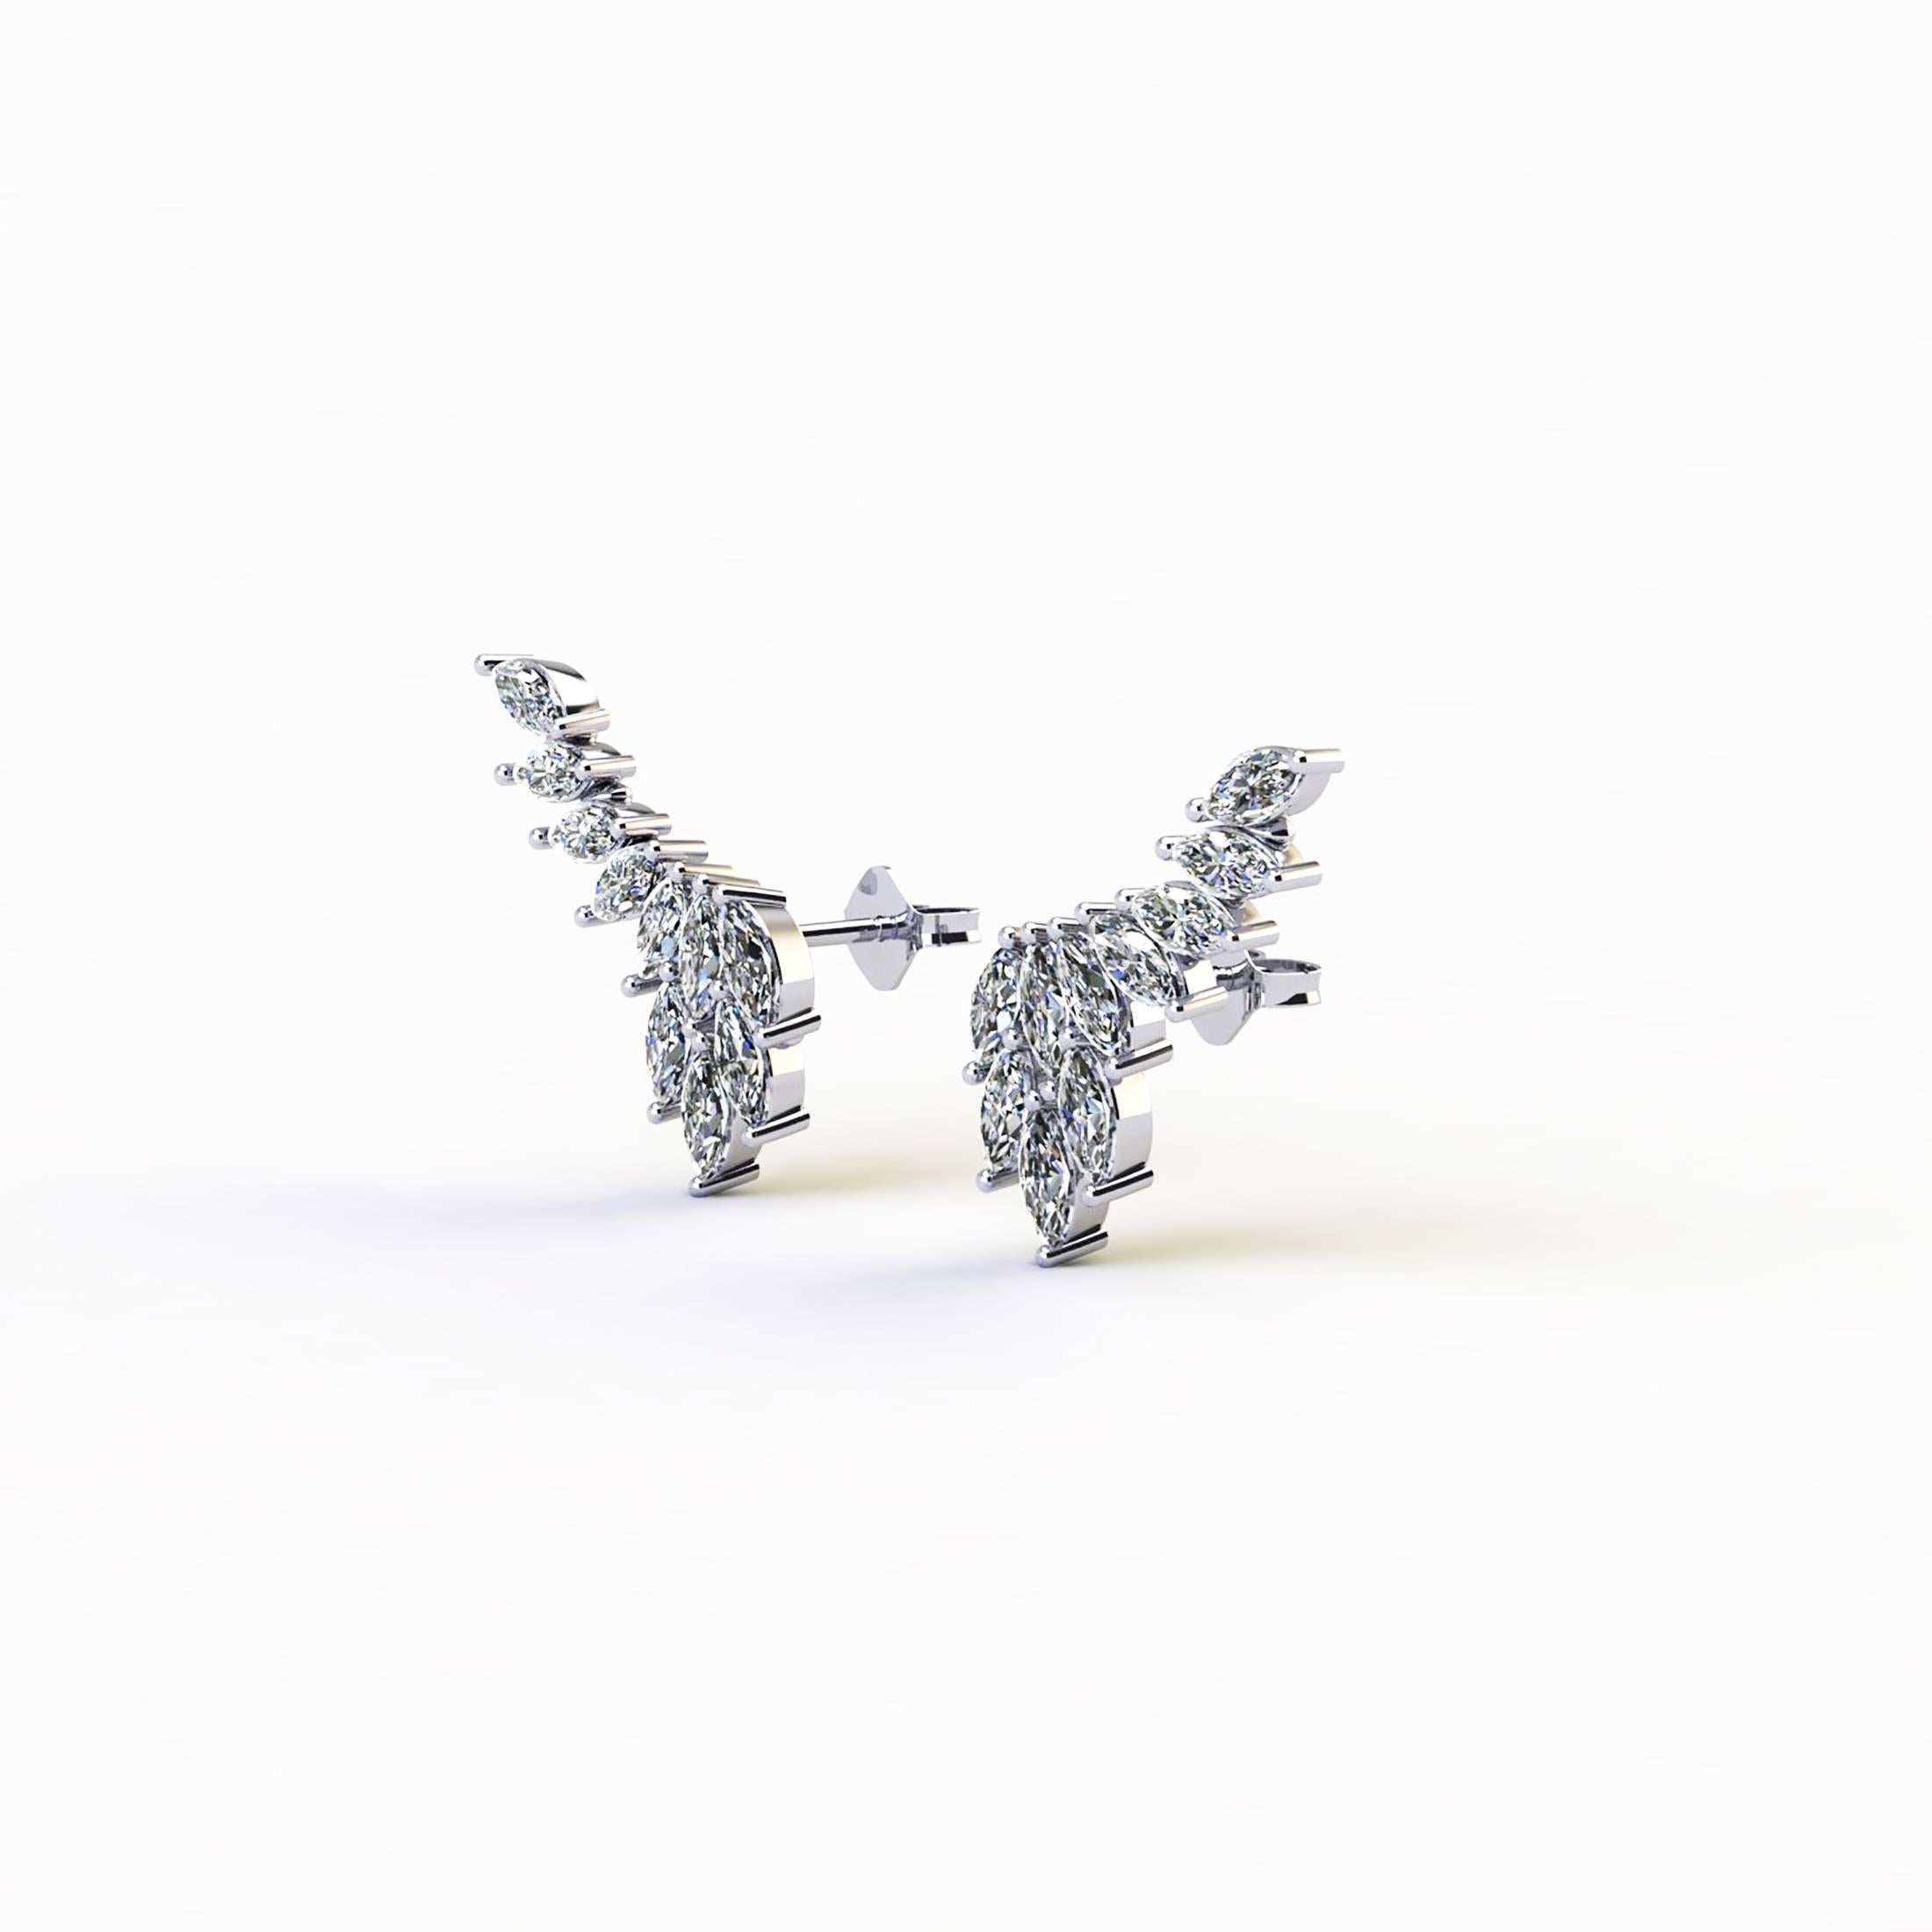 FERRUCCI 2.40 carats Marquise shape Diamonds wing earrings made in Platinum in New York City by Italian master jeweler and designer Francesco Ferrucci, modern stylist look for every sophisticated woman of every age, pret-a-porter, easy to wear from